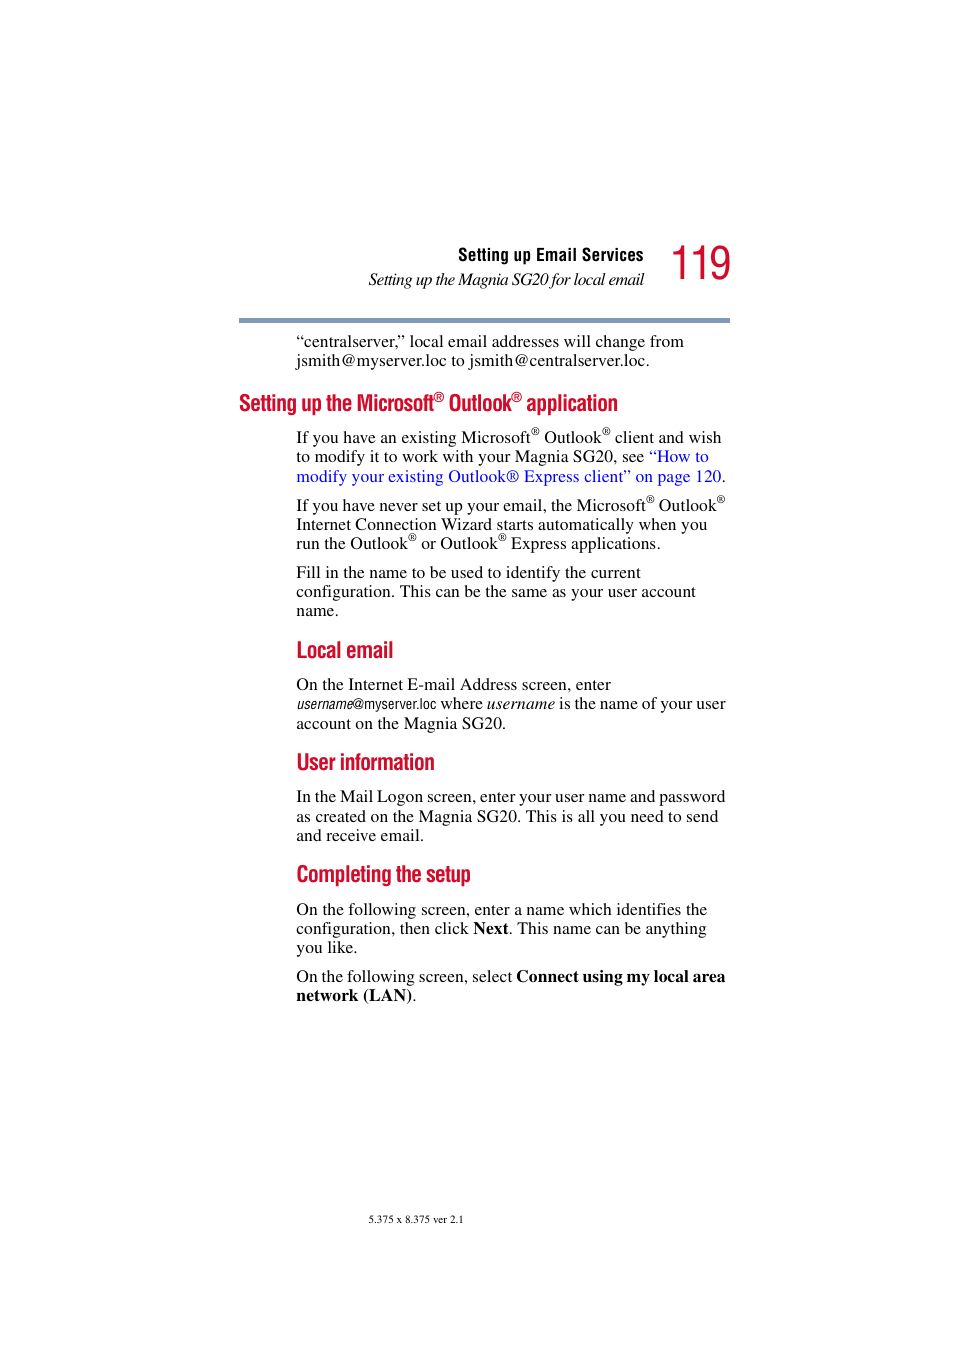 Setting up the microsoft® outlook® application, Setting up the microsoft, Outlook | Application, Local email, User information, Completing the setup | Toshiba Tekbright 700P User Manual | Page 117 / 305